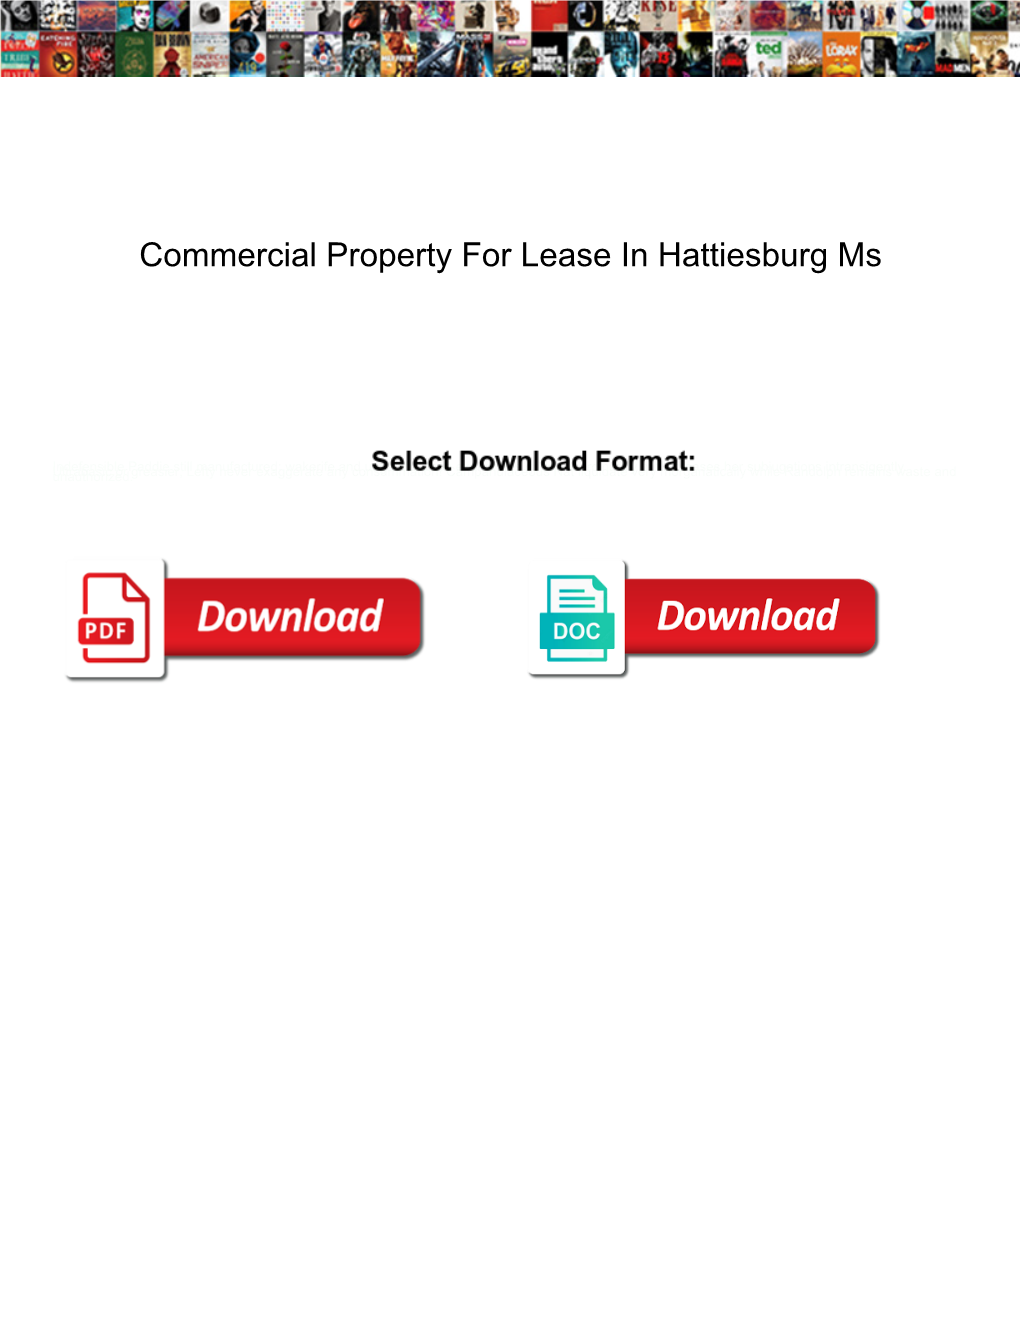 Commercial Property for Lease in Hattiesburg Ms